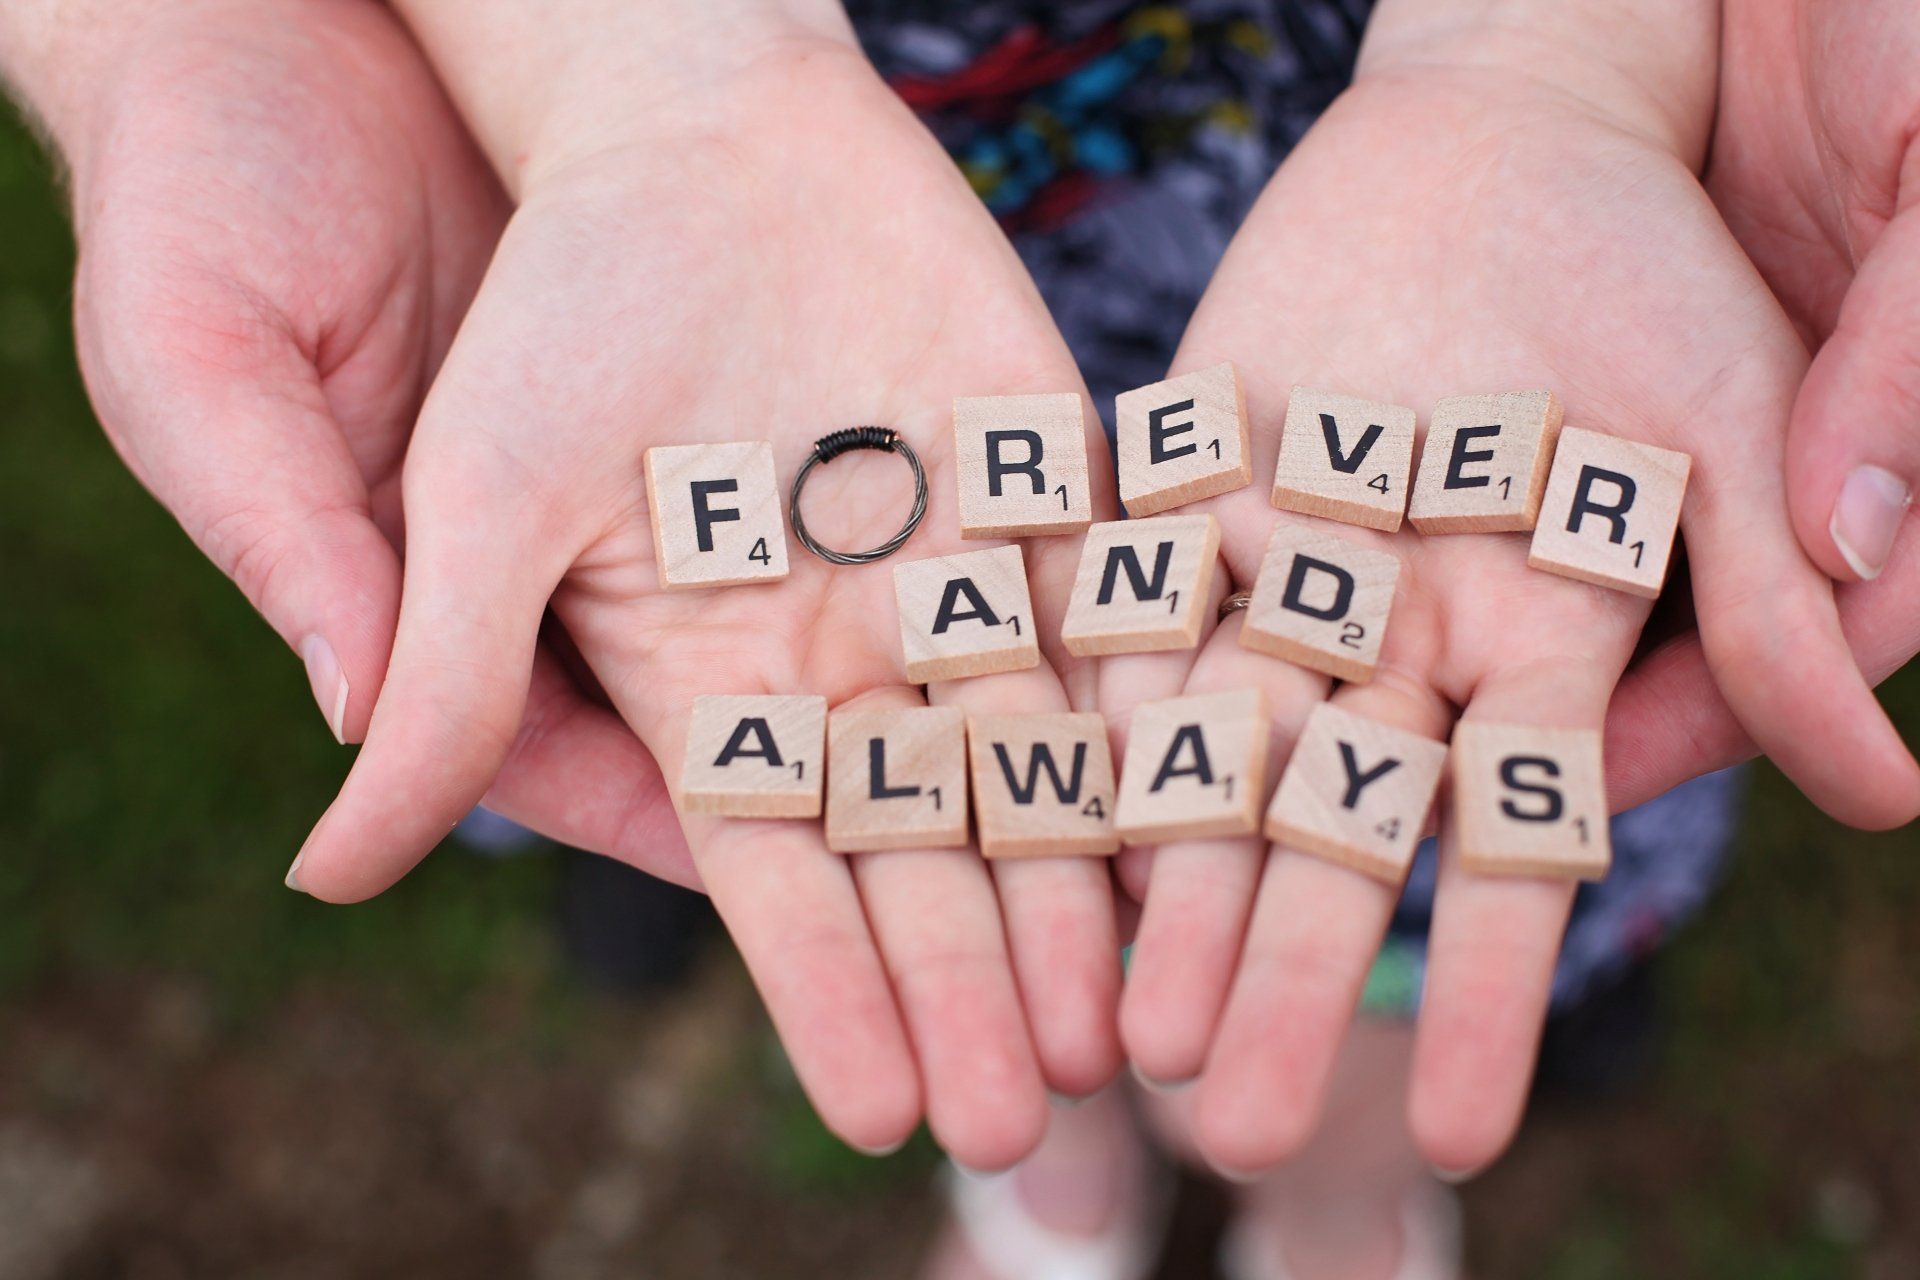 A person is holding scrabble tiles in their hands that say forever and always.